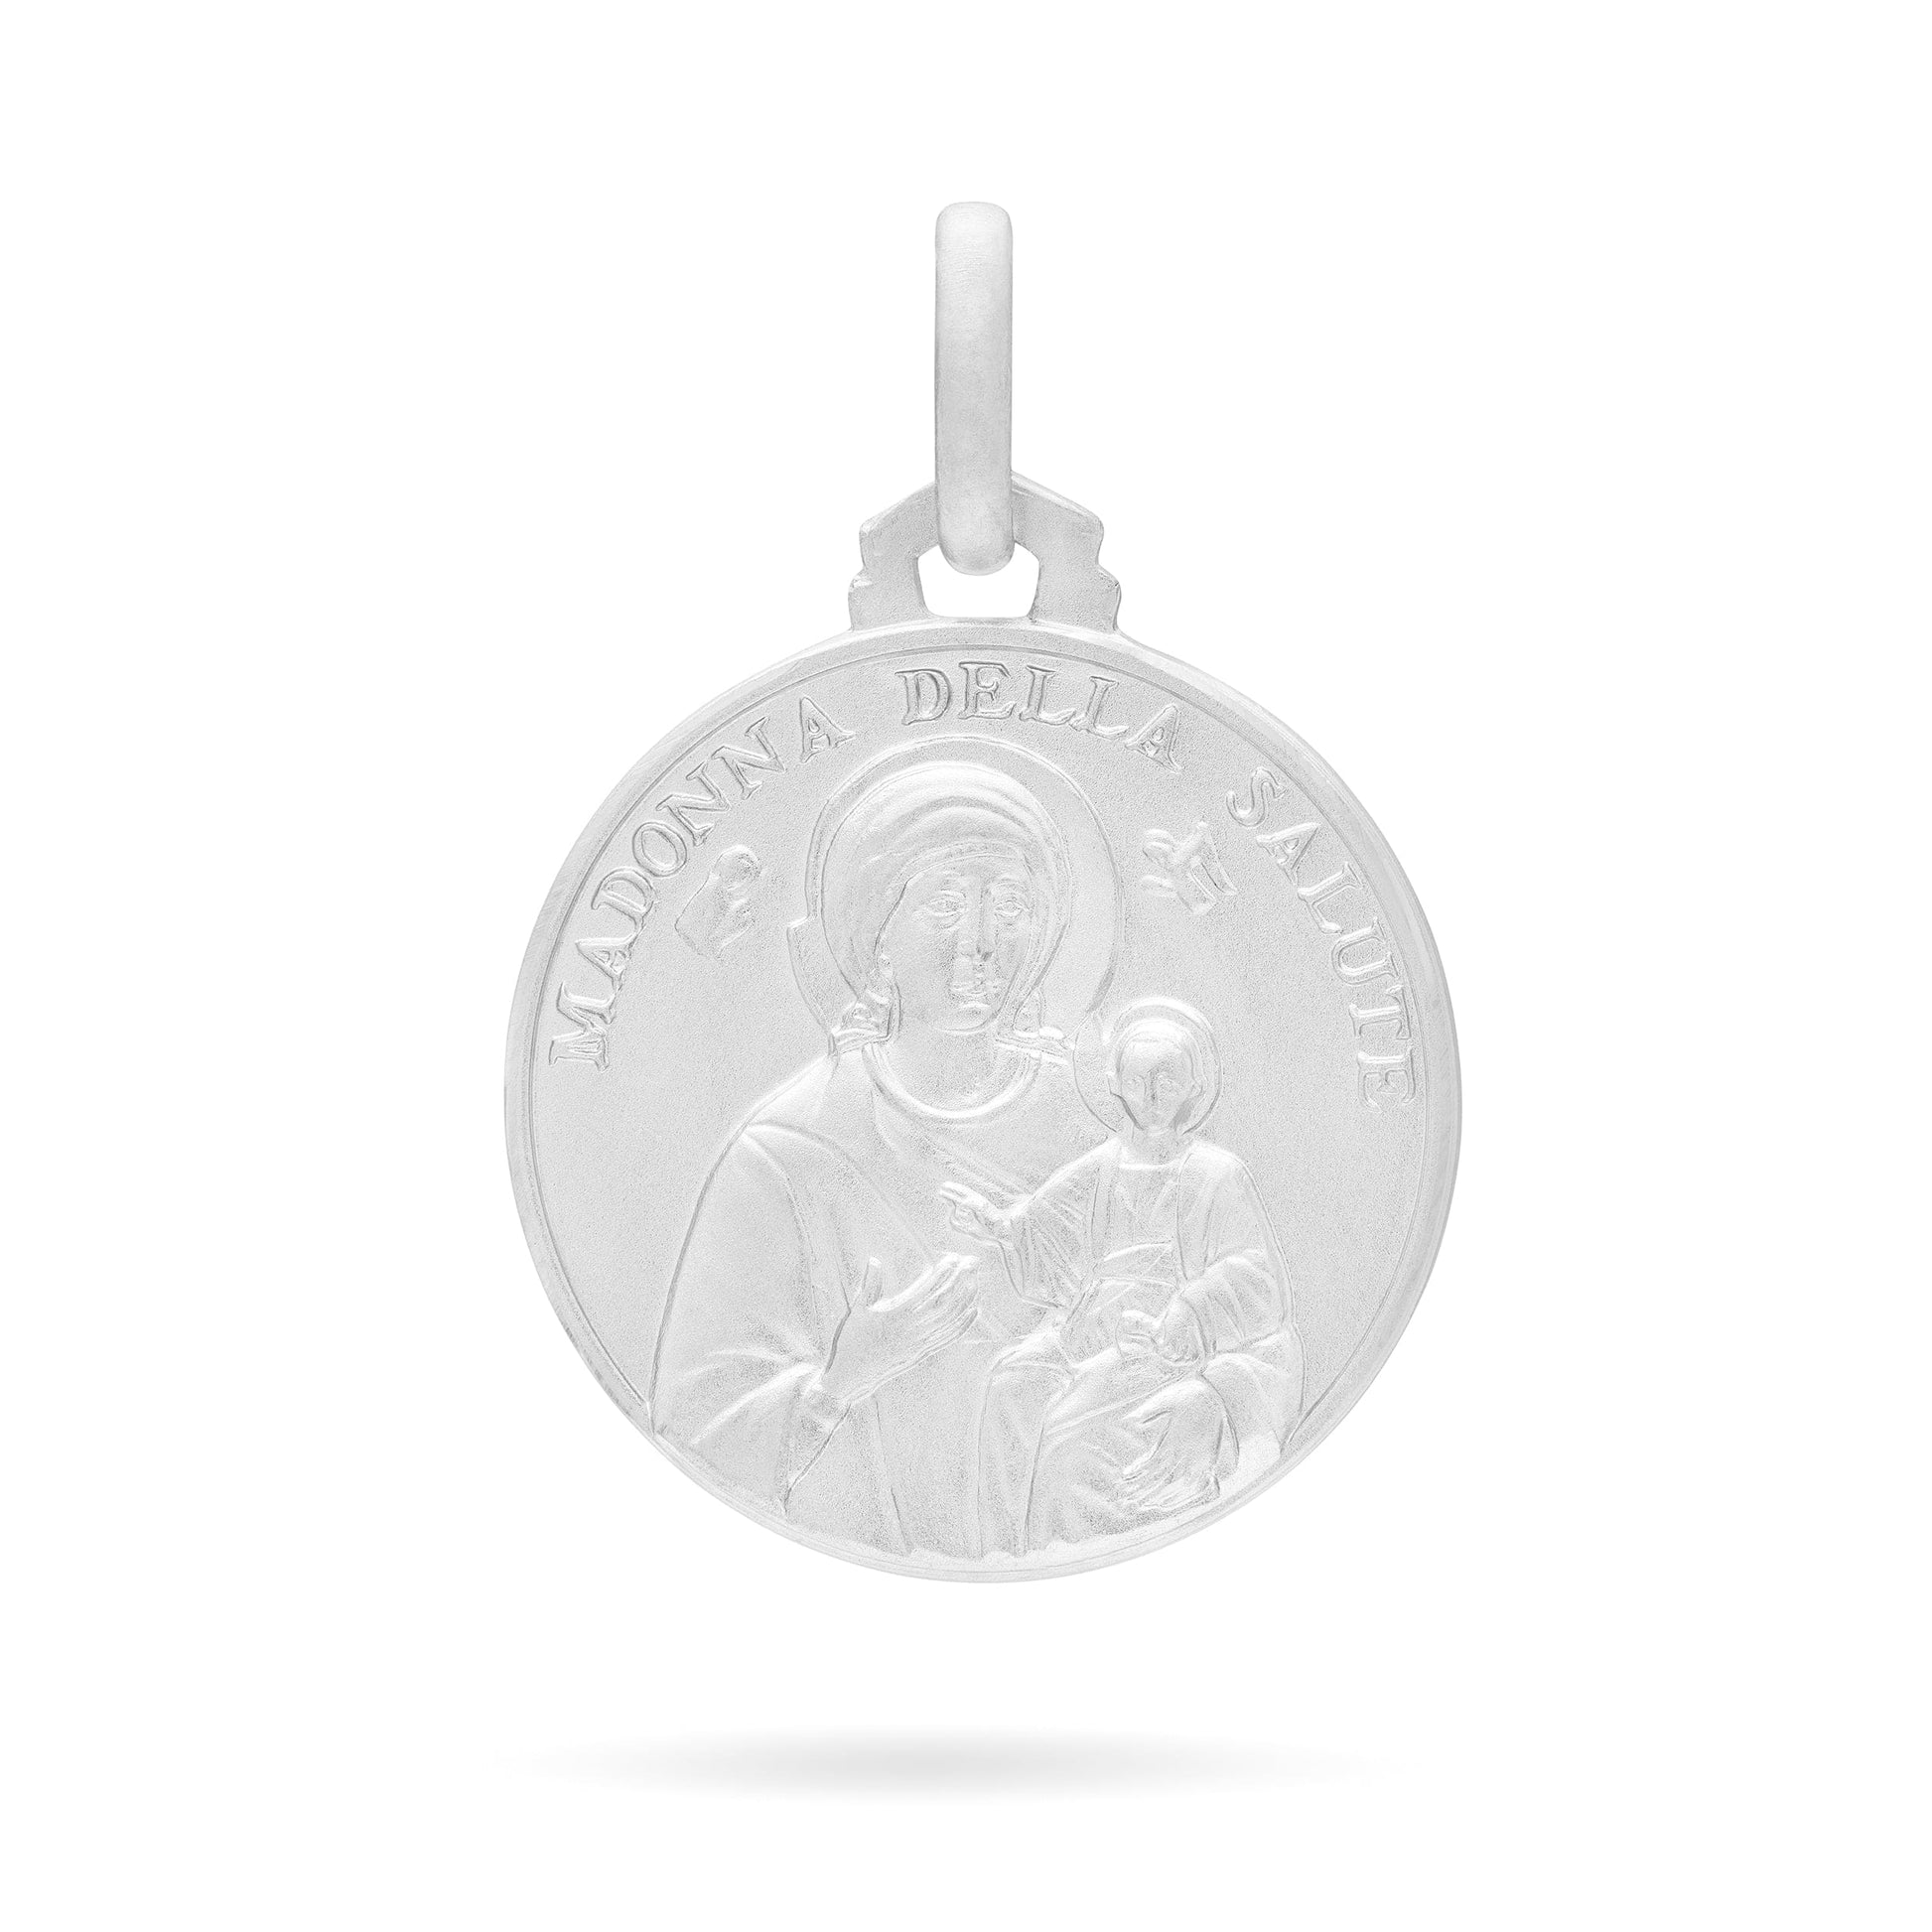 MONDO CATTOLICO Jewelry 18 mm (0.71 in) Our Lady of Good Health White Gold medal